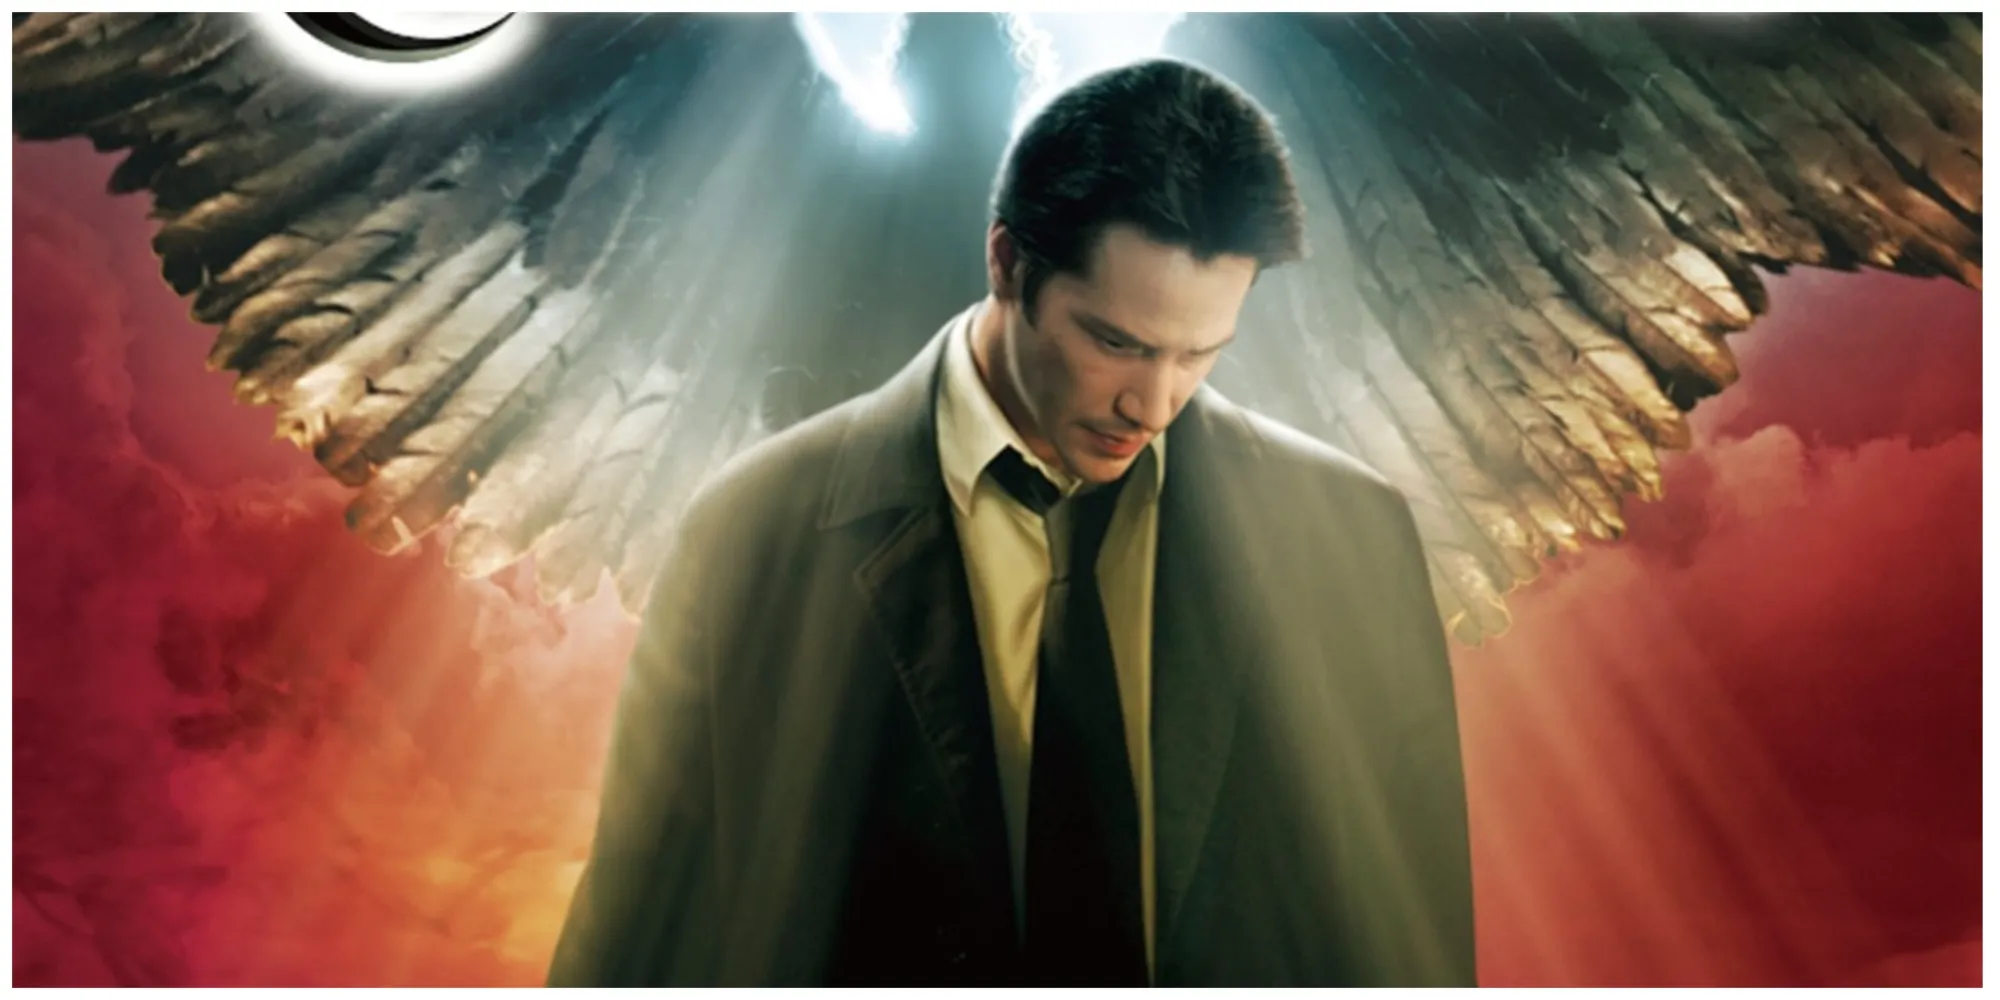 Keanu Reeves come Constantine